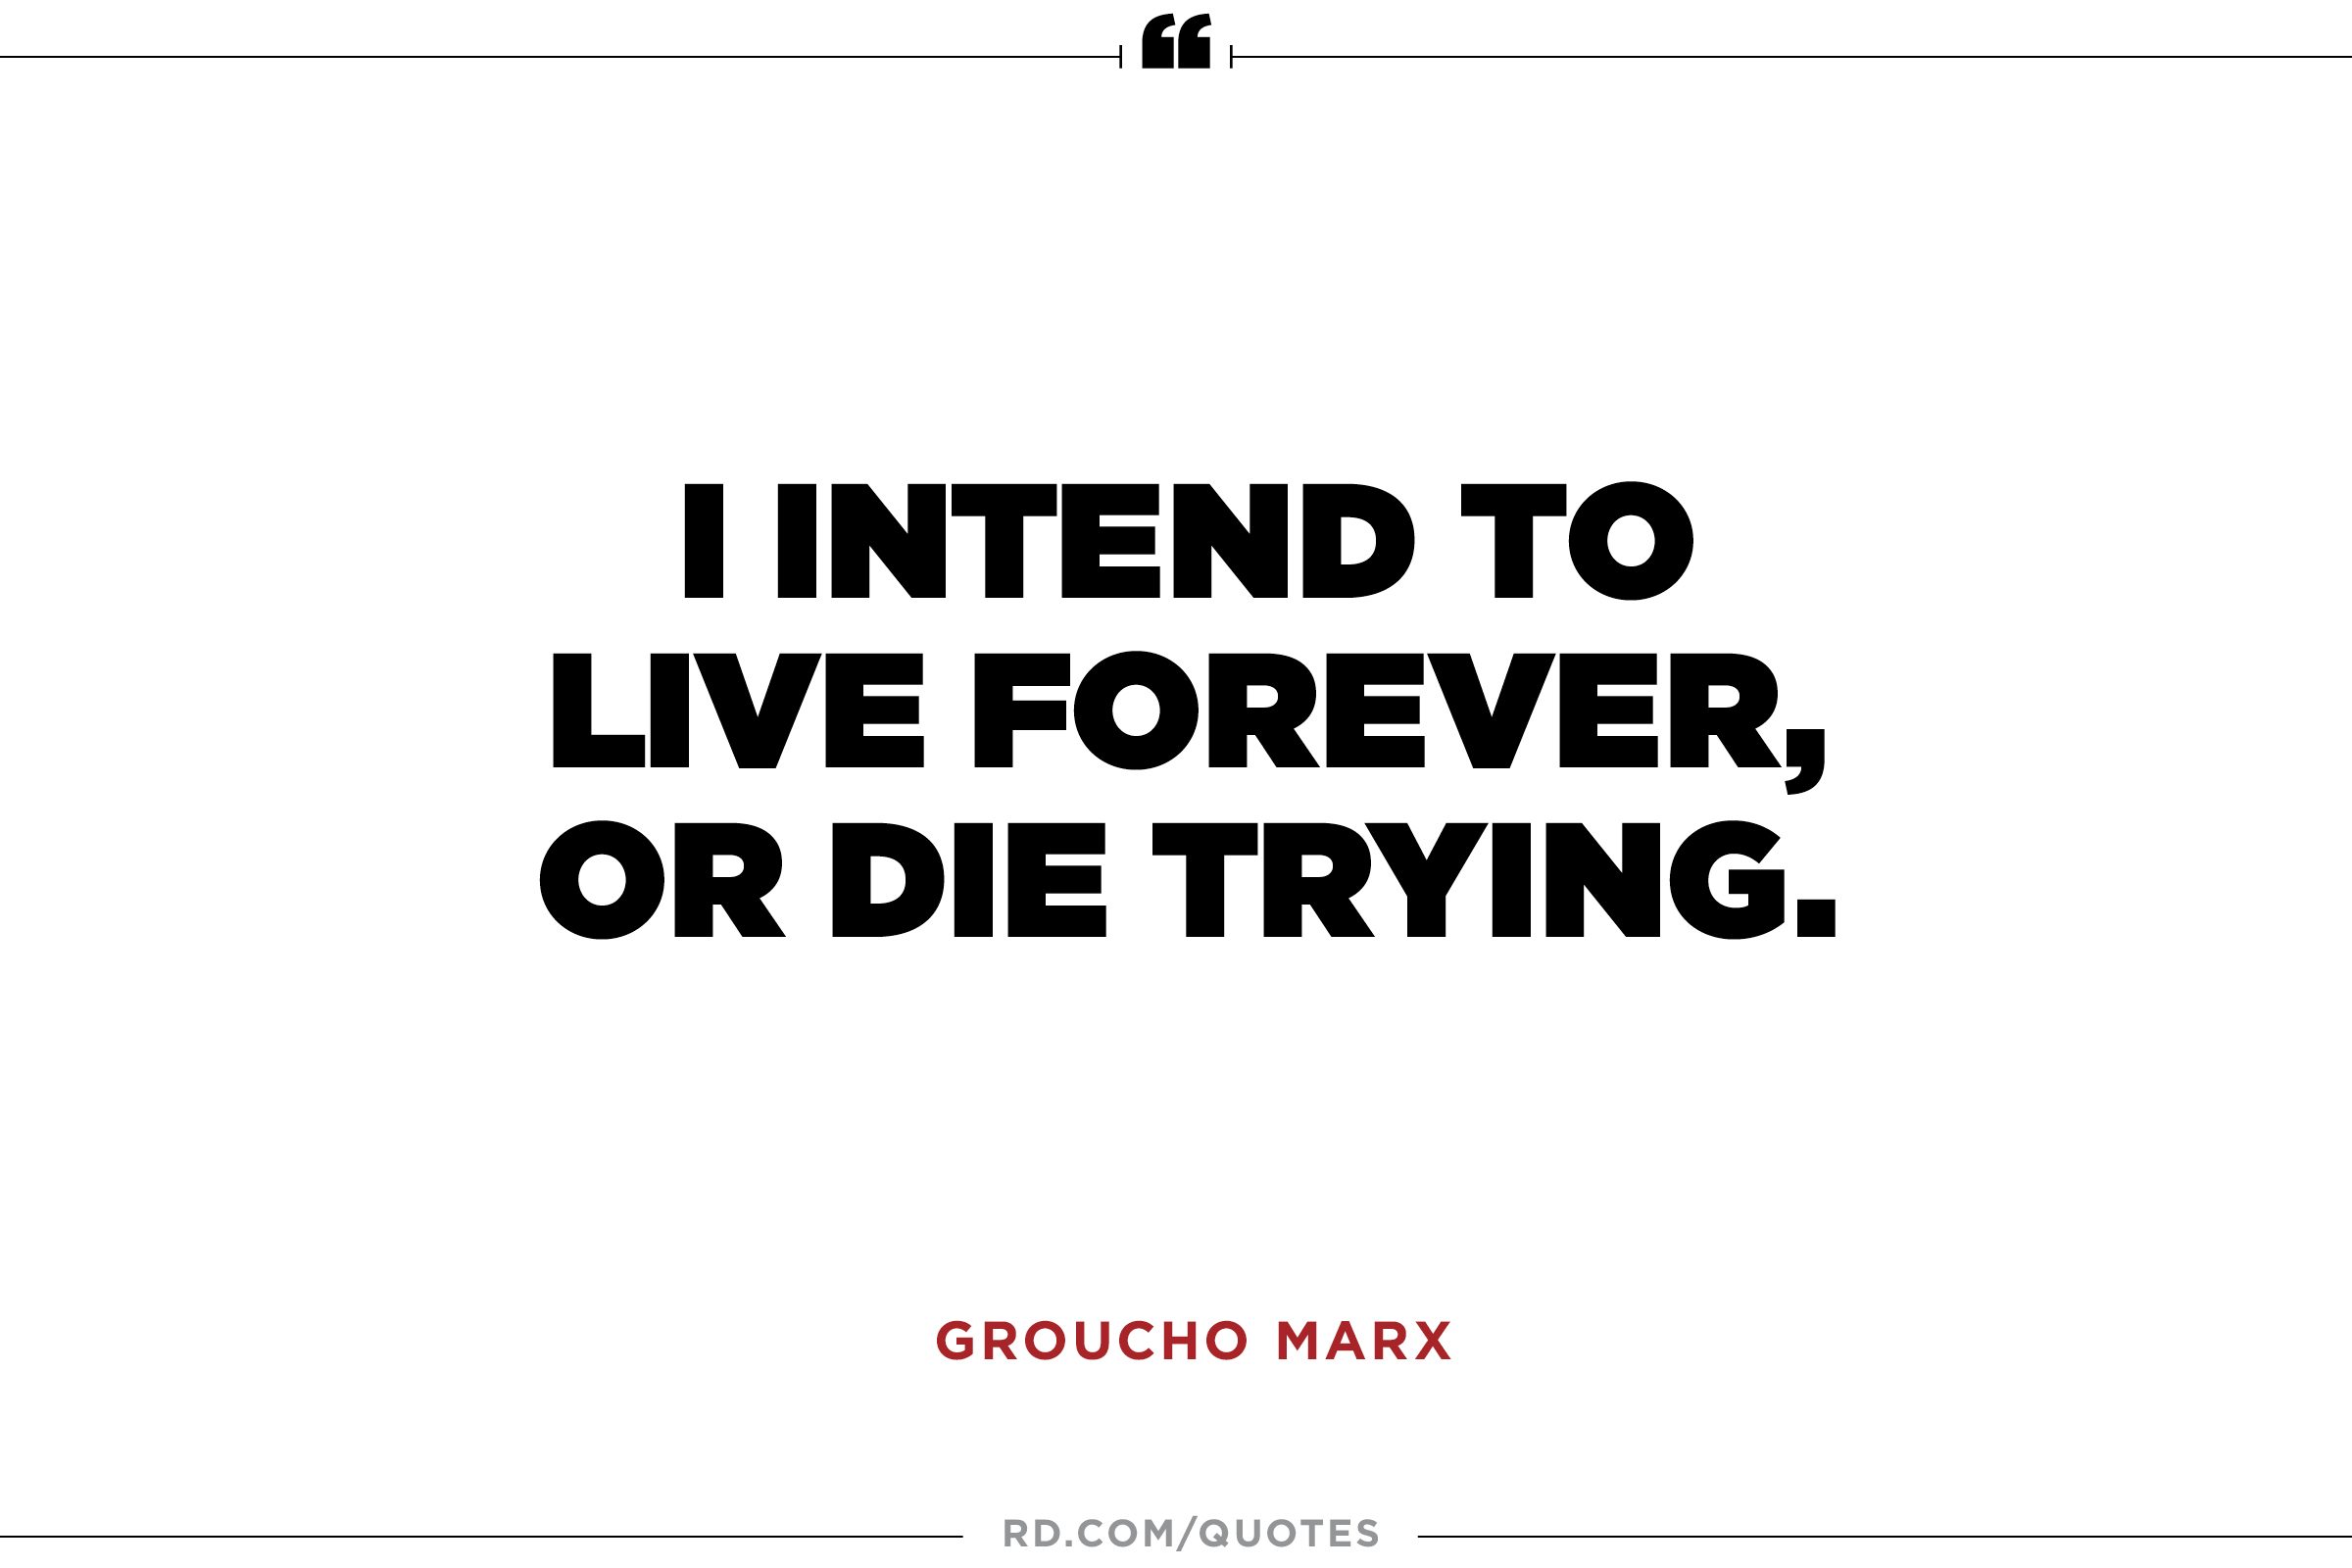 quotes about ting funny 12 wise groucho marx quotes reader u0027s digest reader u0027s digest